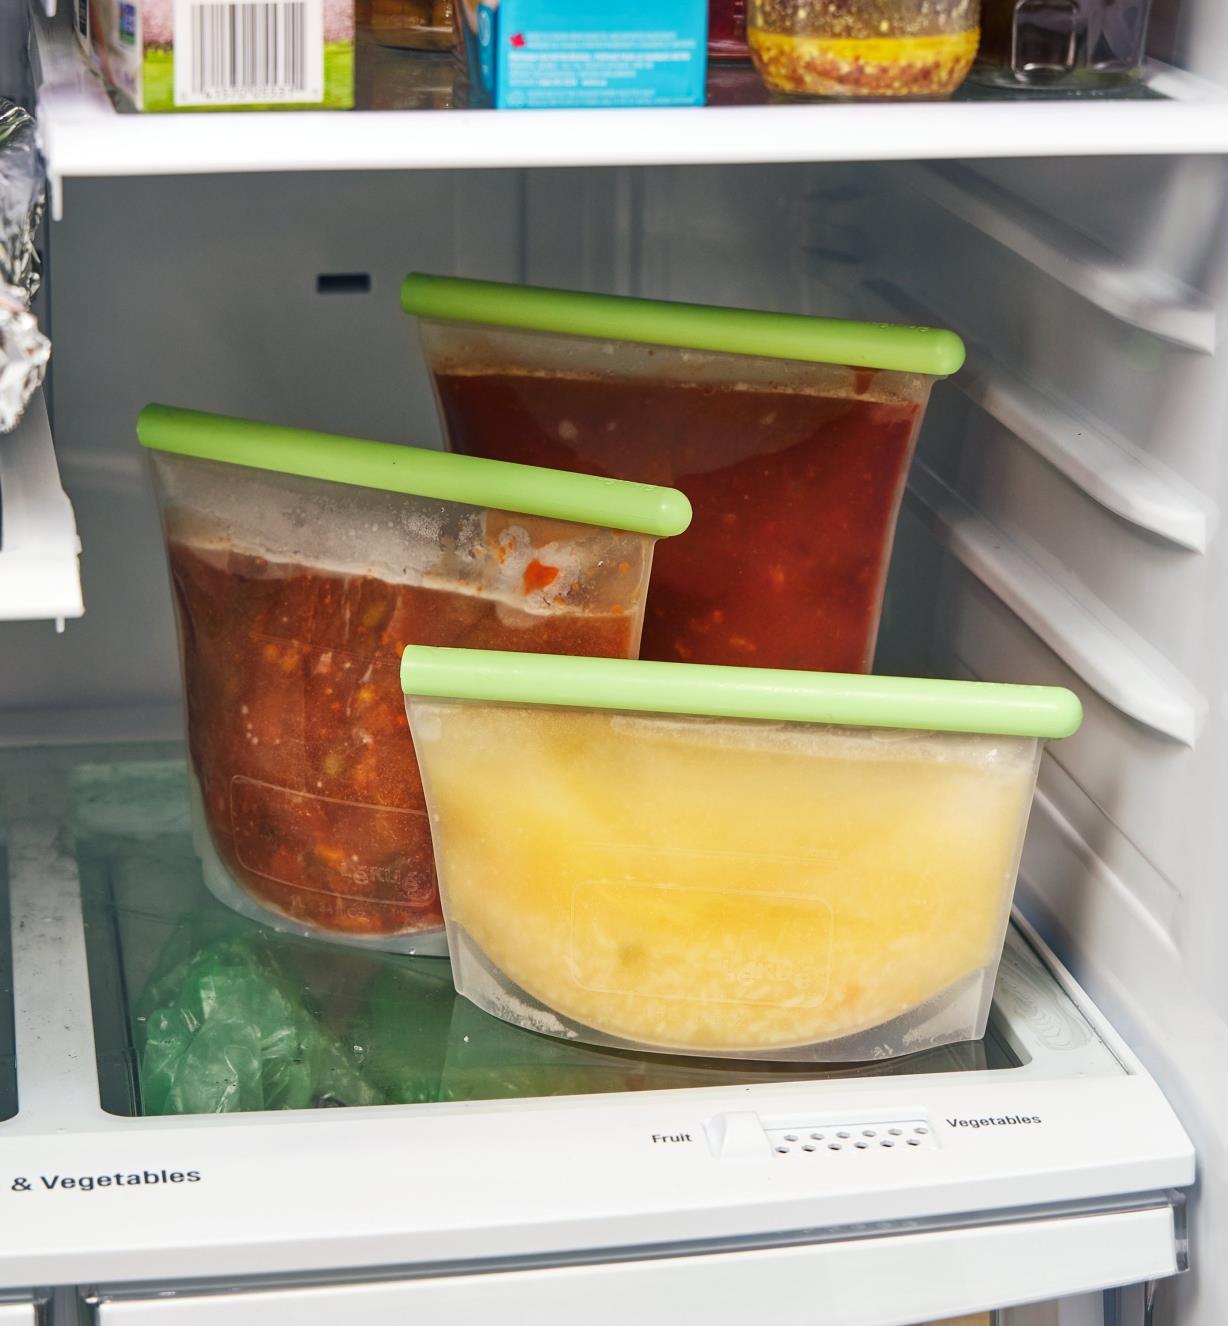 Three sizes of reusable silicone bags filled with food on a refrigerator shelf